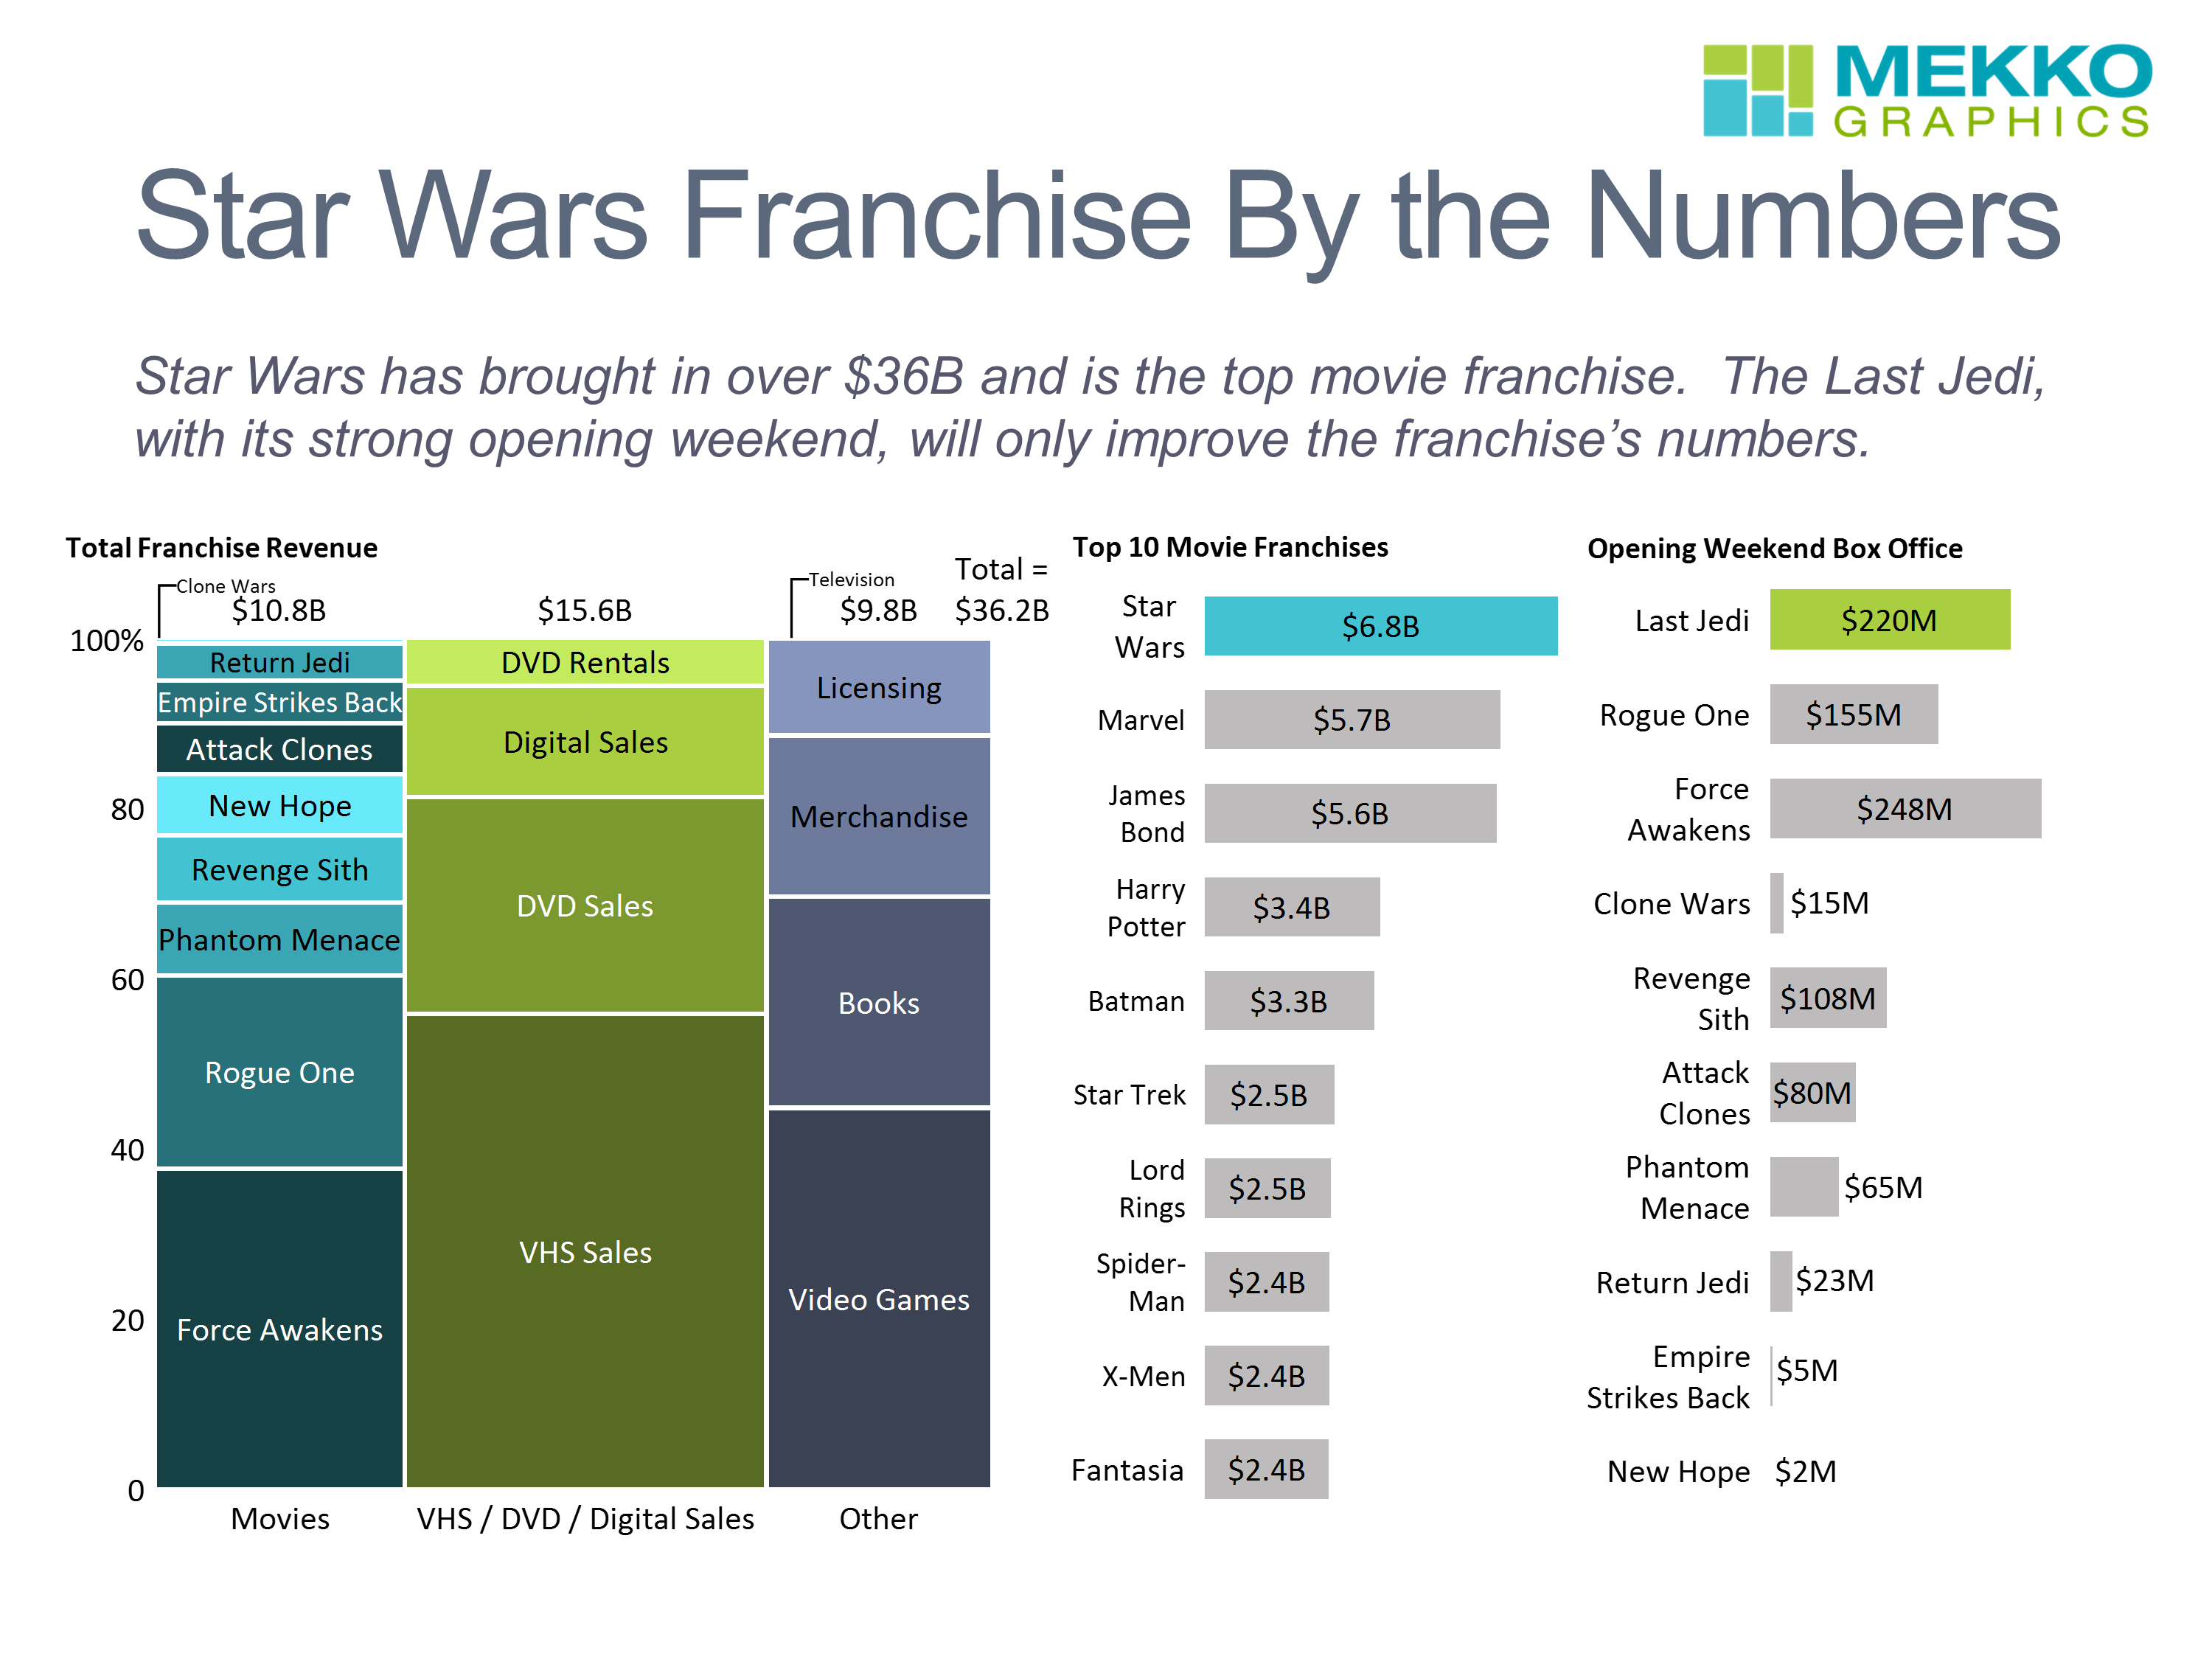 Star Wars Franchise by the Numbers - Mekko Graphics